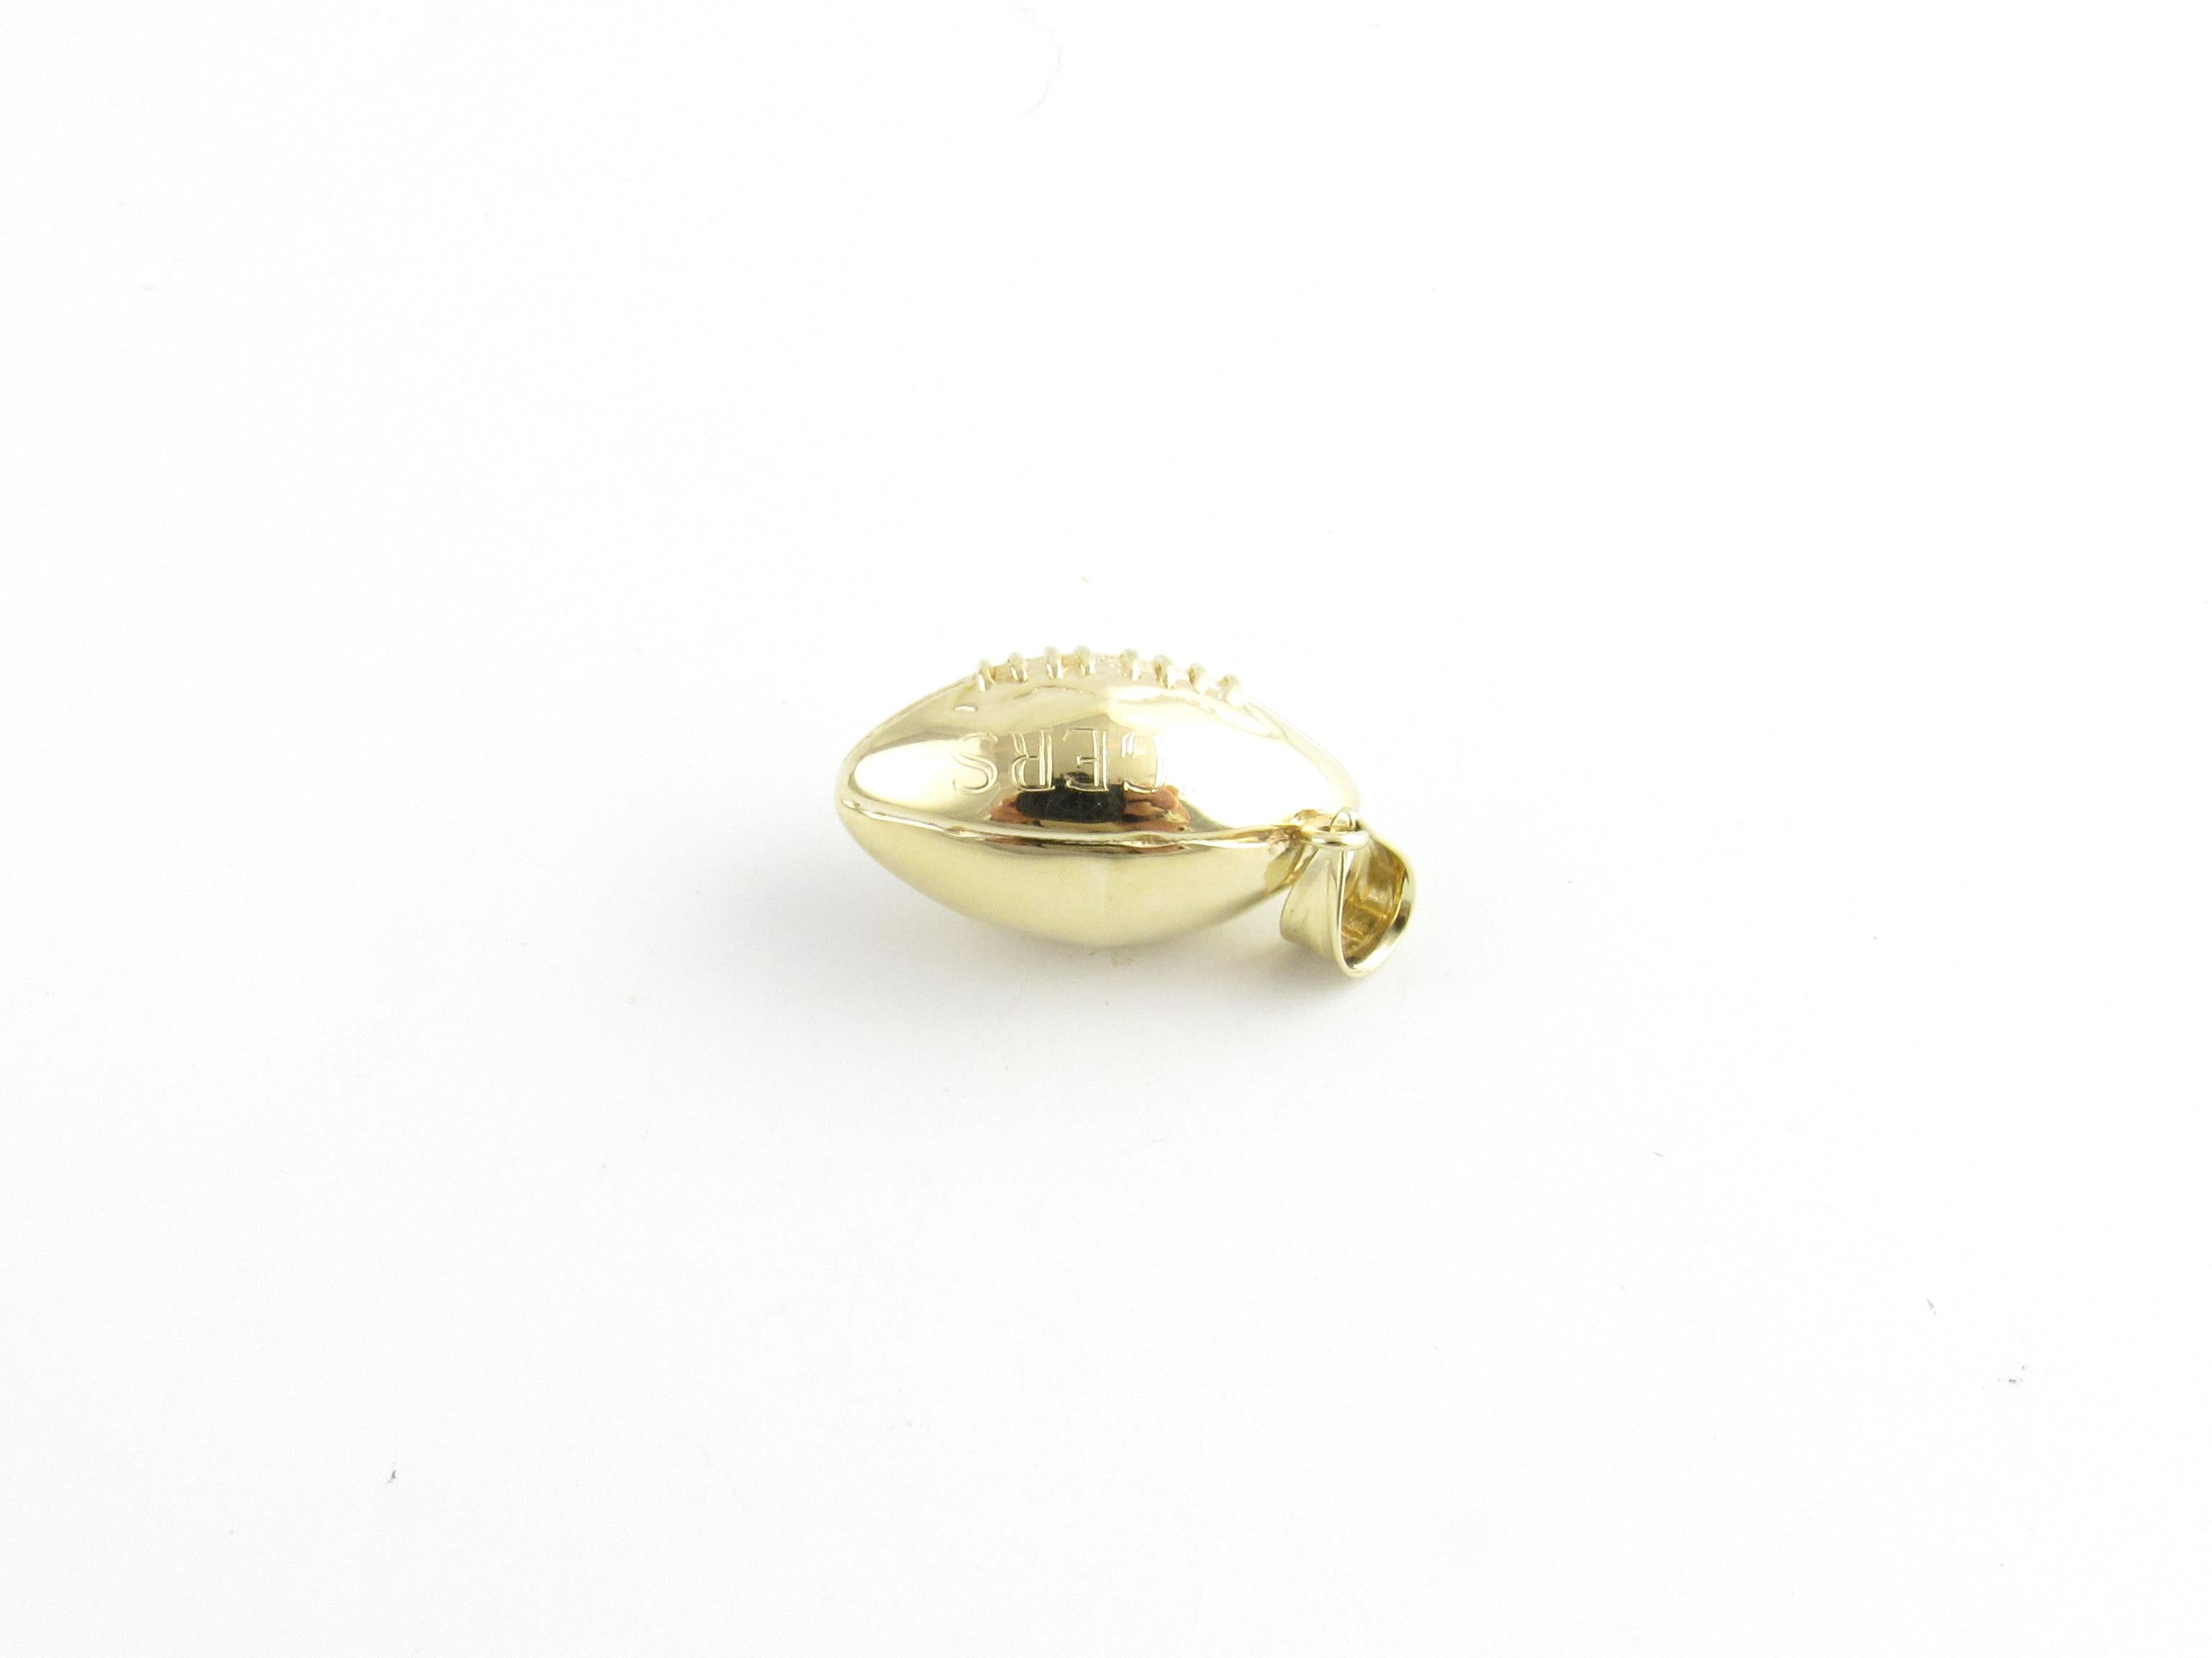 Vintage 14 Karat Yellow Gold Football Charm

Touchdown!

This lovely 3D charm features a miniature football meticulously detailed in 14K yellow gold.

Size: 21 mm x 25 mm (actual charm)

Weight: 3.4 dwt. / 5.3 gr.

Stamped: 14K

Hallmark: DZ

Very